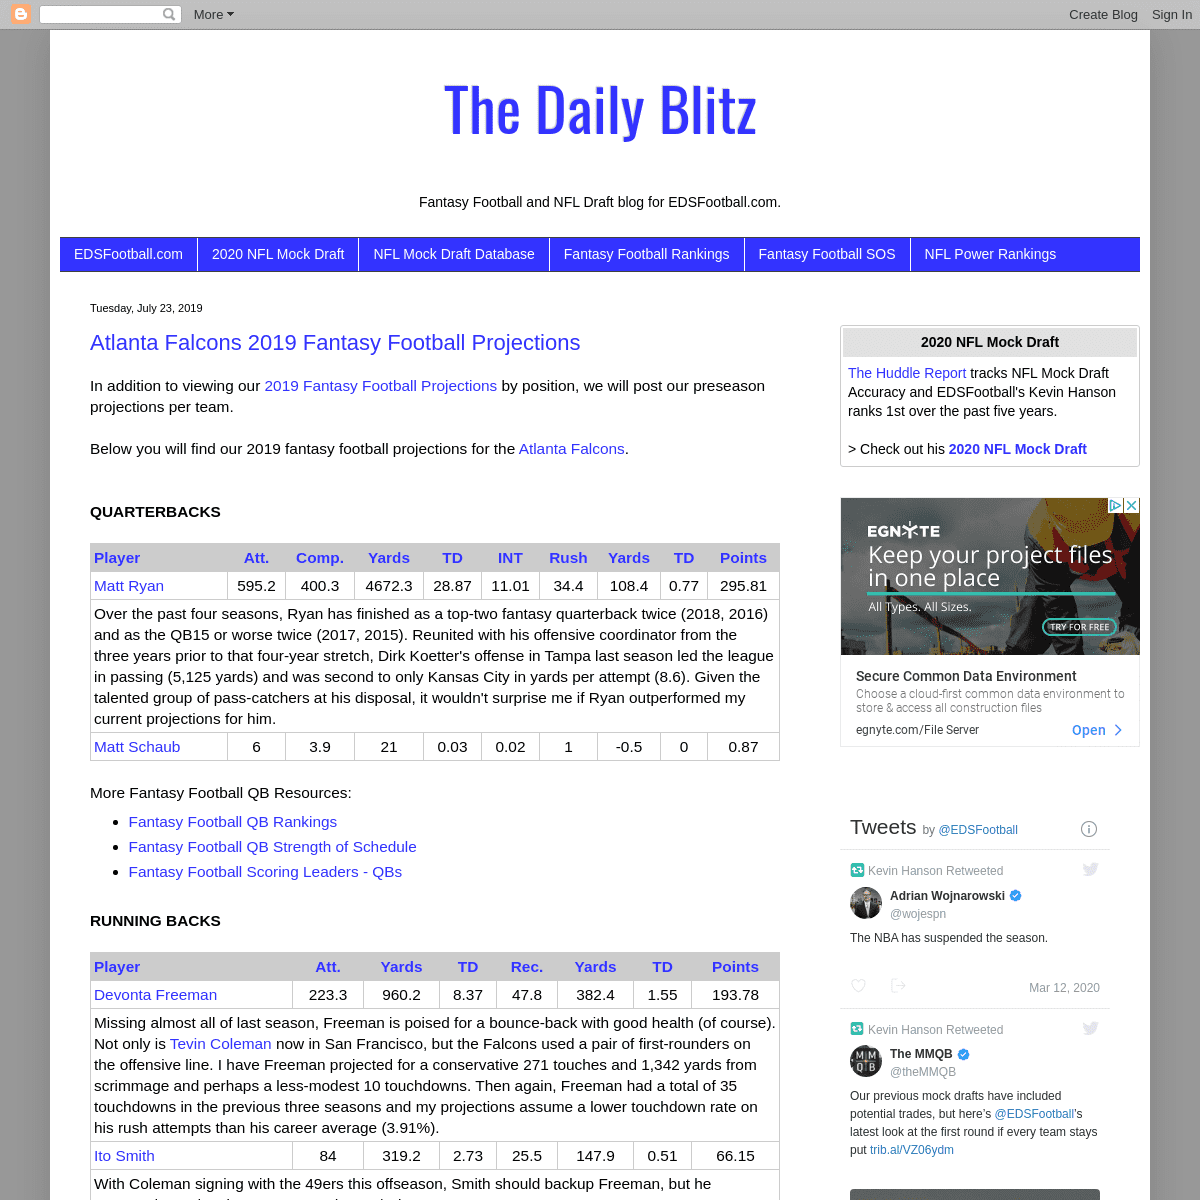 A complete backup of thedailyblitz.com